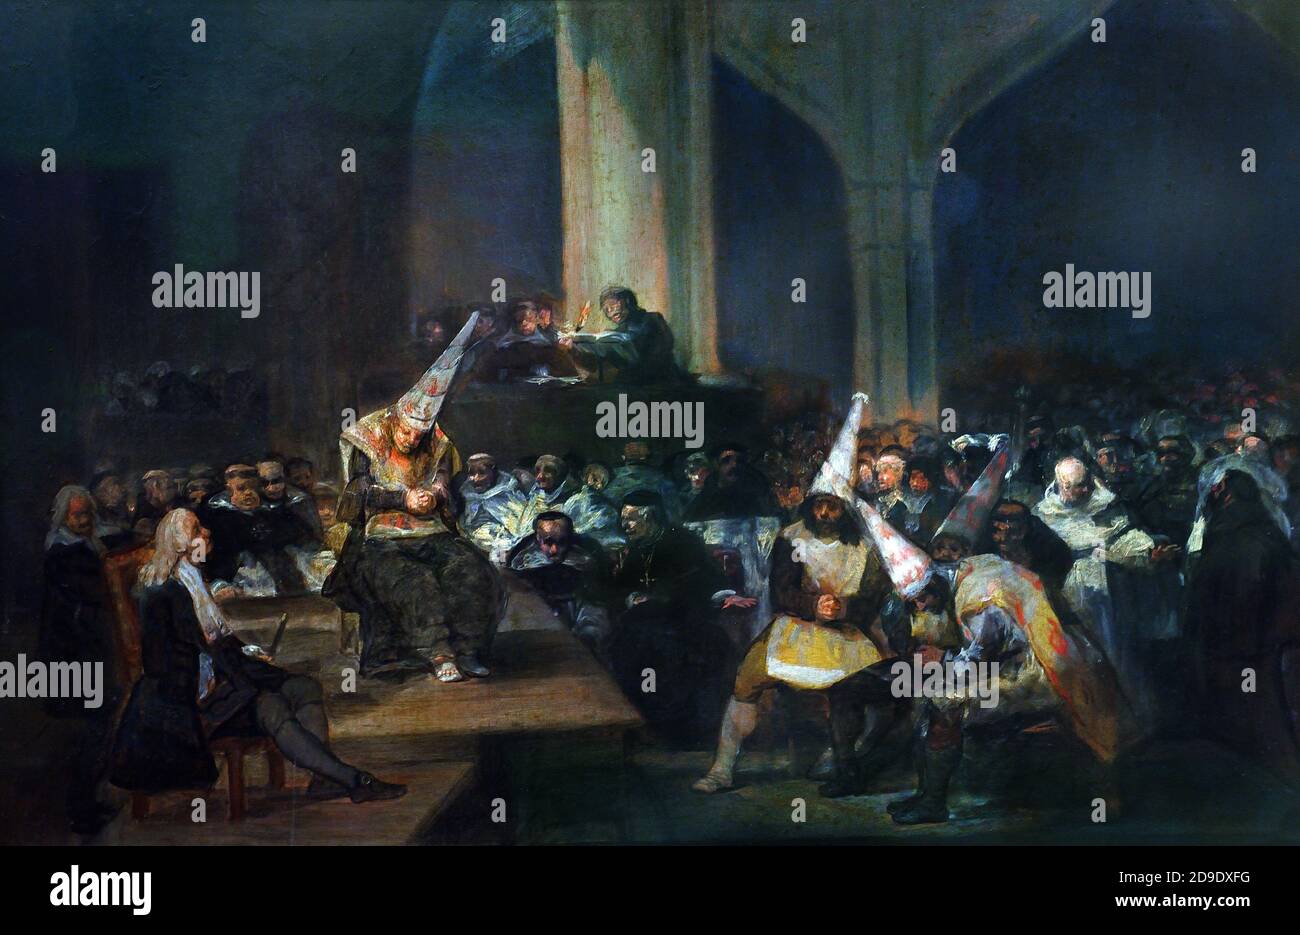 The Inquisition Tribunal, also known as The Court of the Inquisition or The Inquisition Scene, 1812-1819 Francisco José de Goya y Lucientes 1746 – 1828 Spain, Spanish, Stock Photo